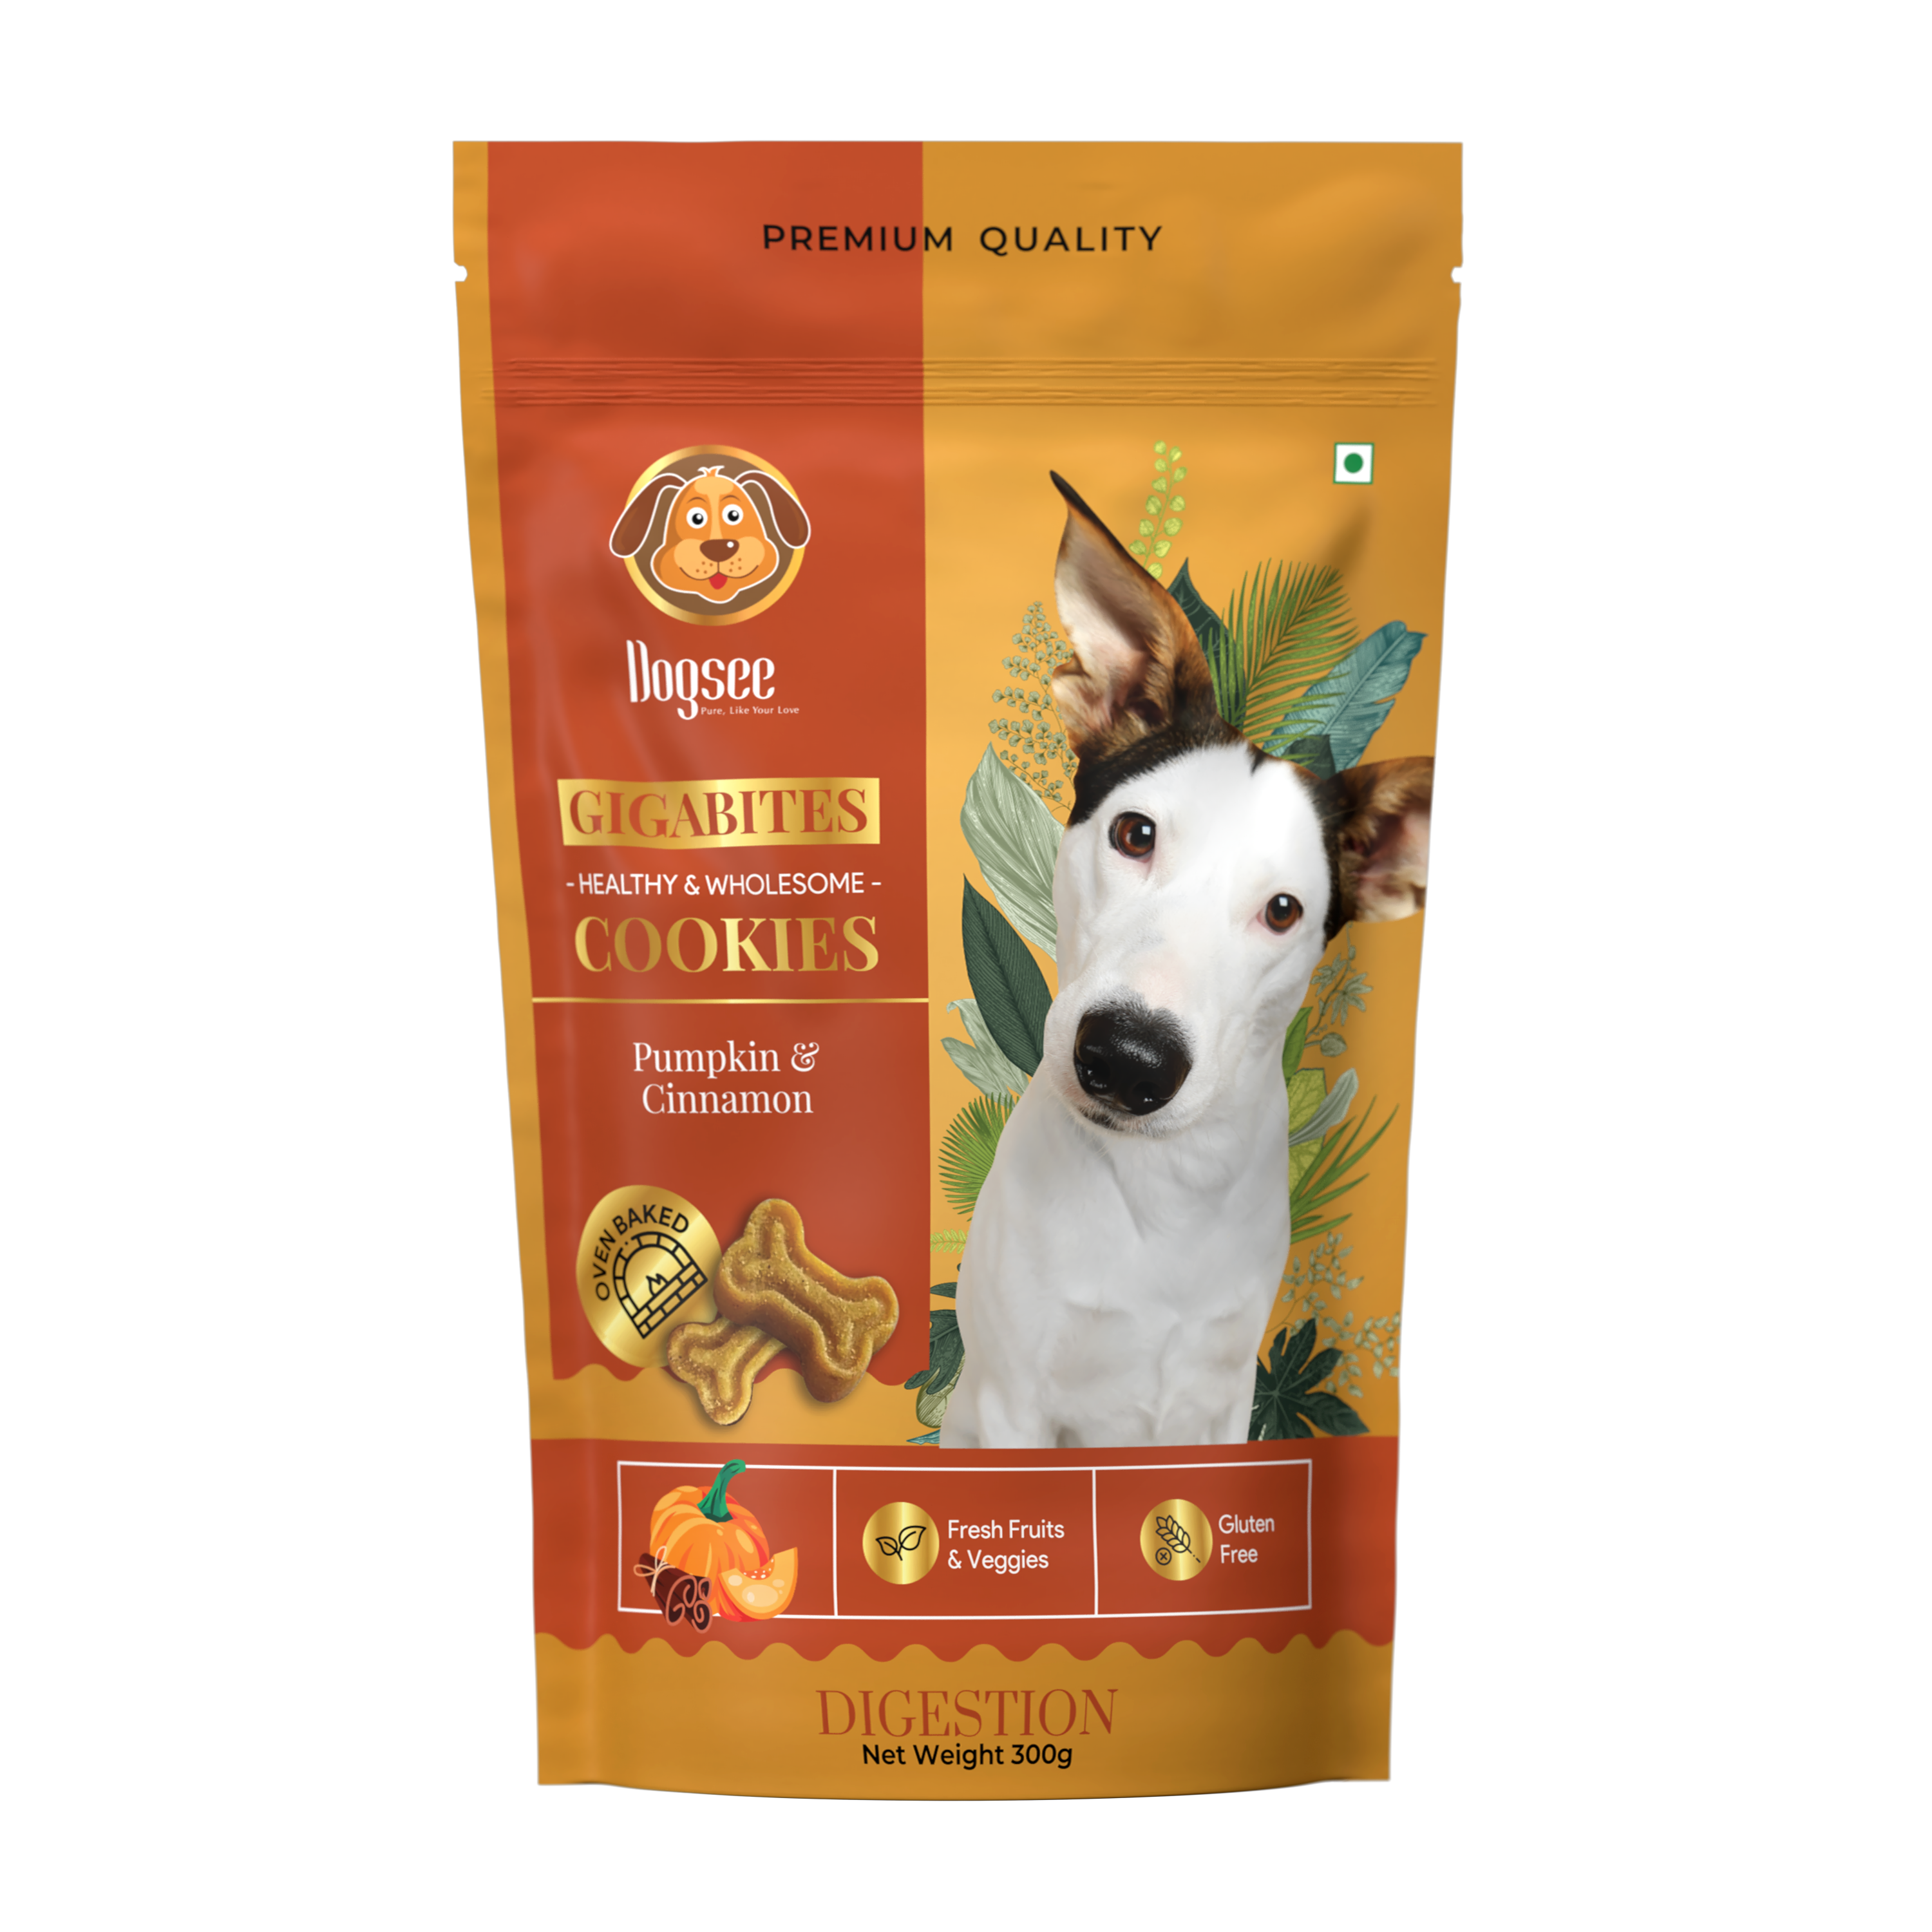 Dogsee Gigabites | Cookies for Dogs | 300gm